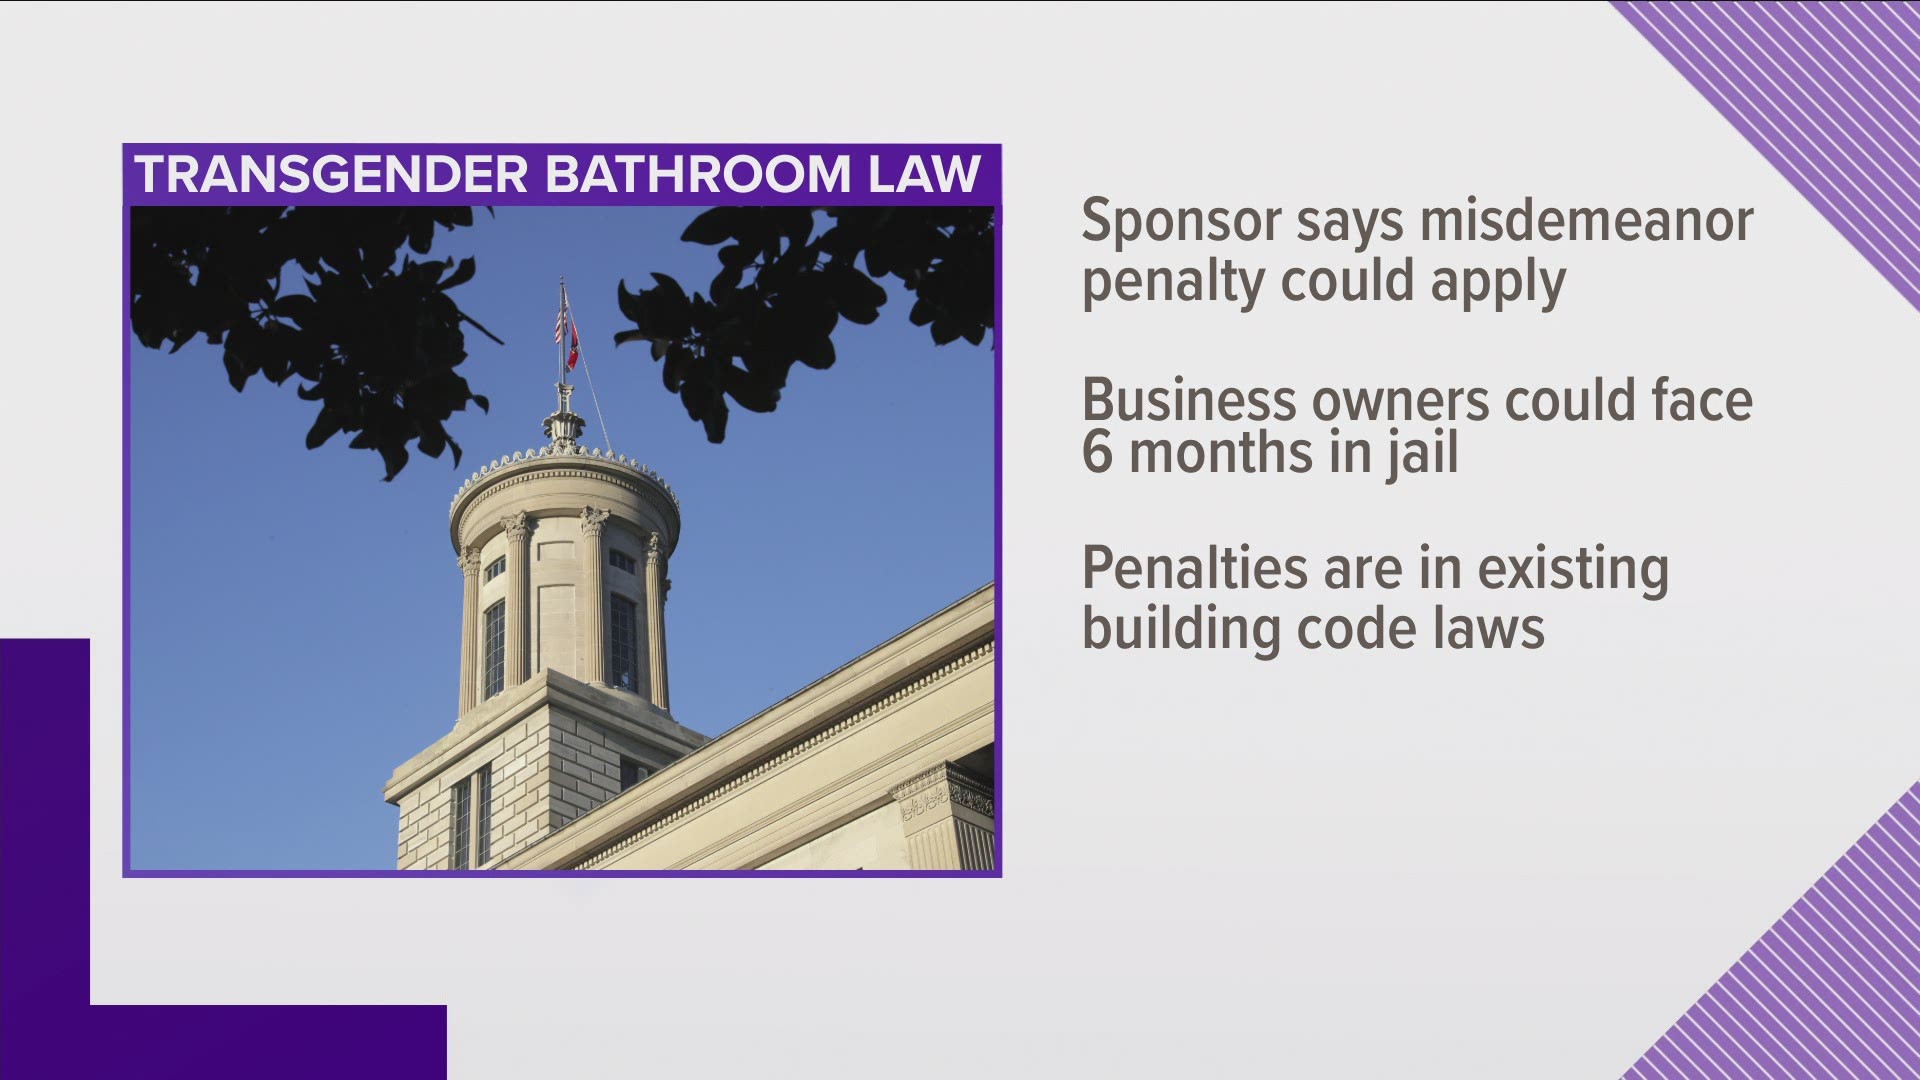 The law signed earlier this year requires businesses and government facilities to post signs if they allow transgender people to use the bathroom of their choice.